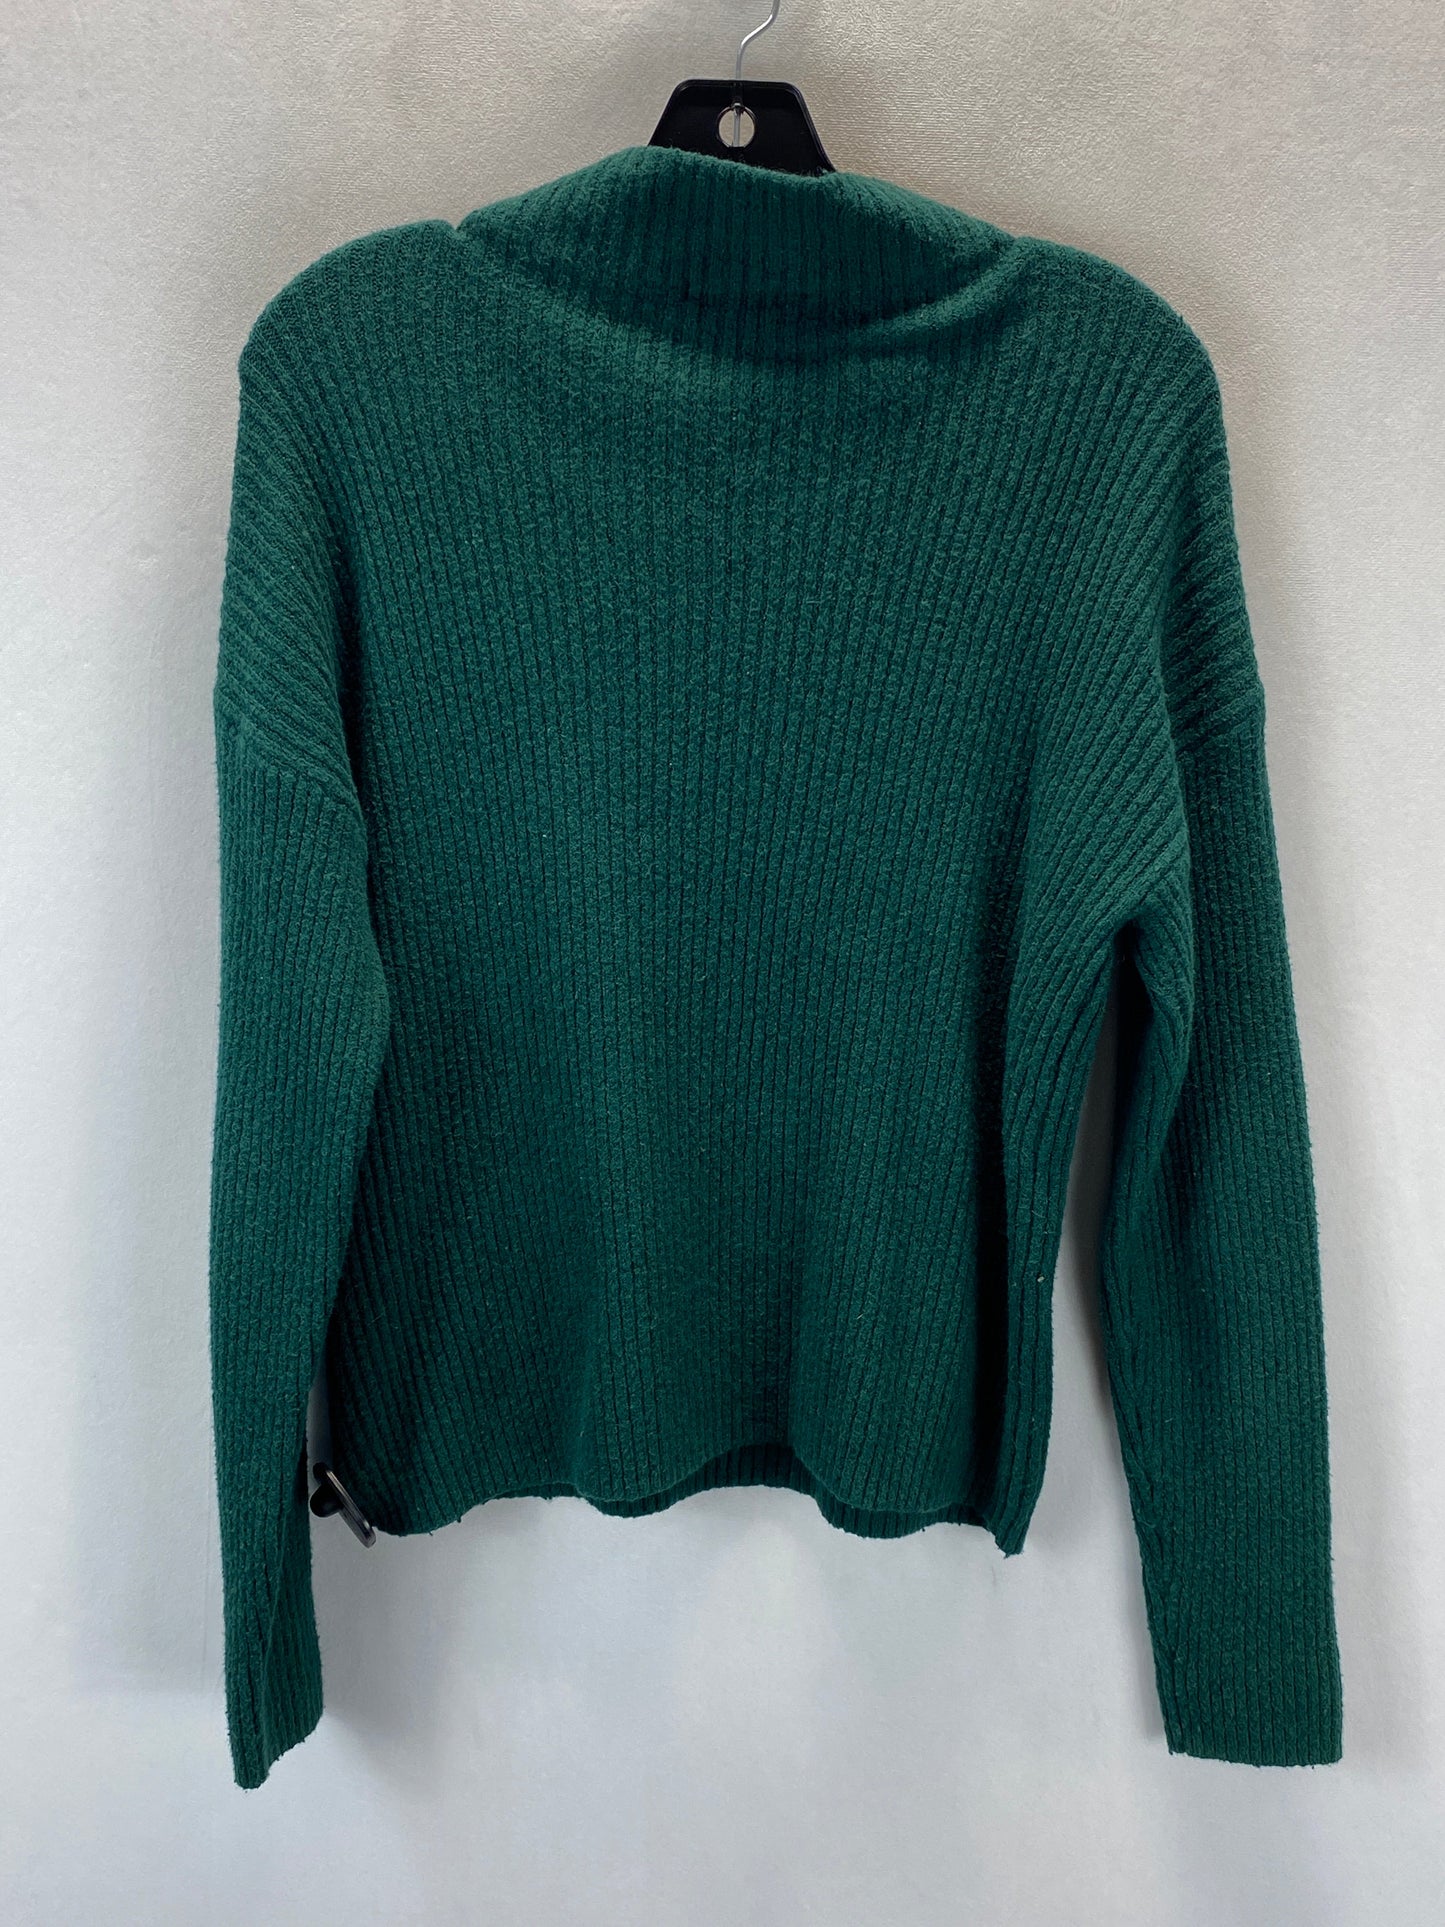 Sweater By Bp  Size: S